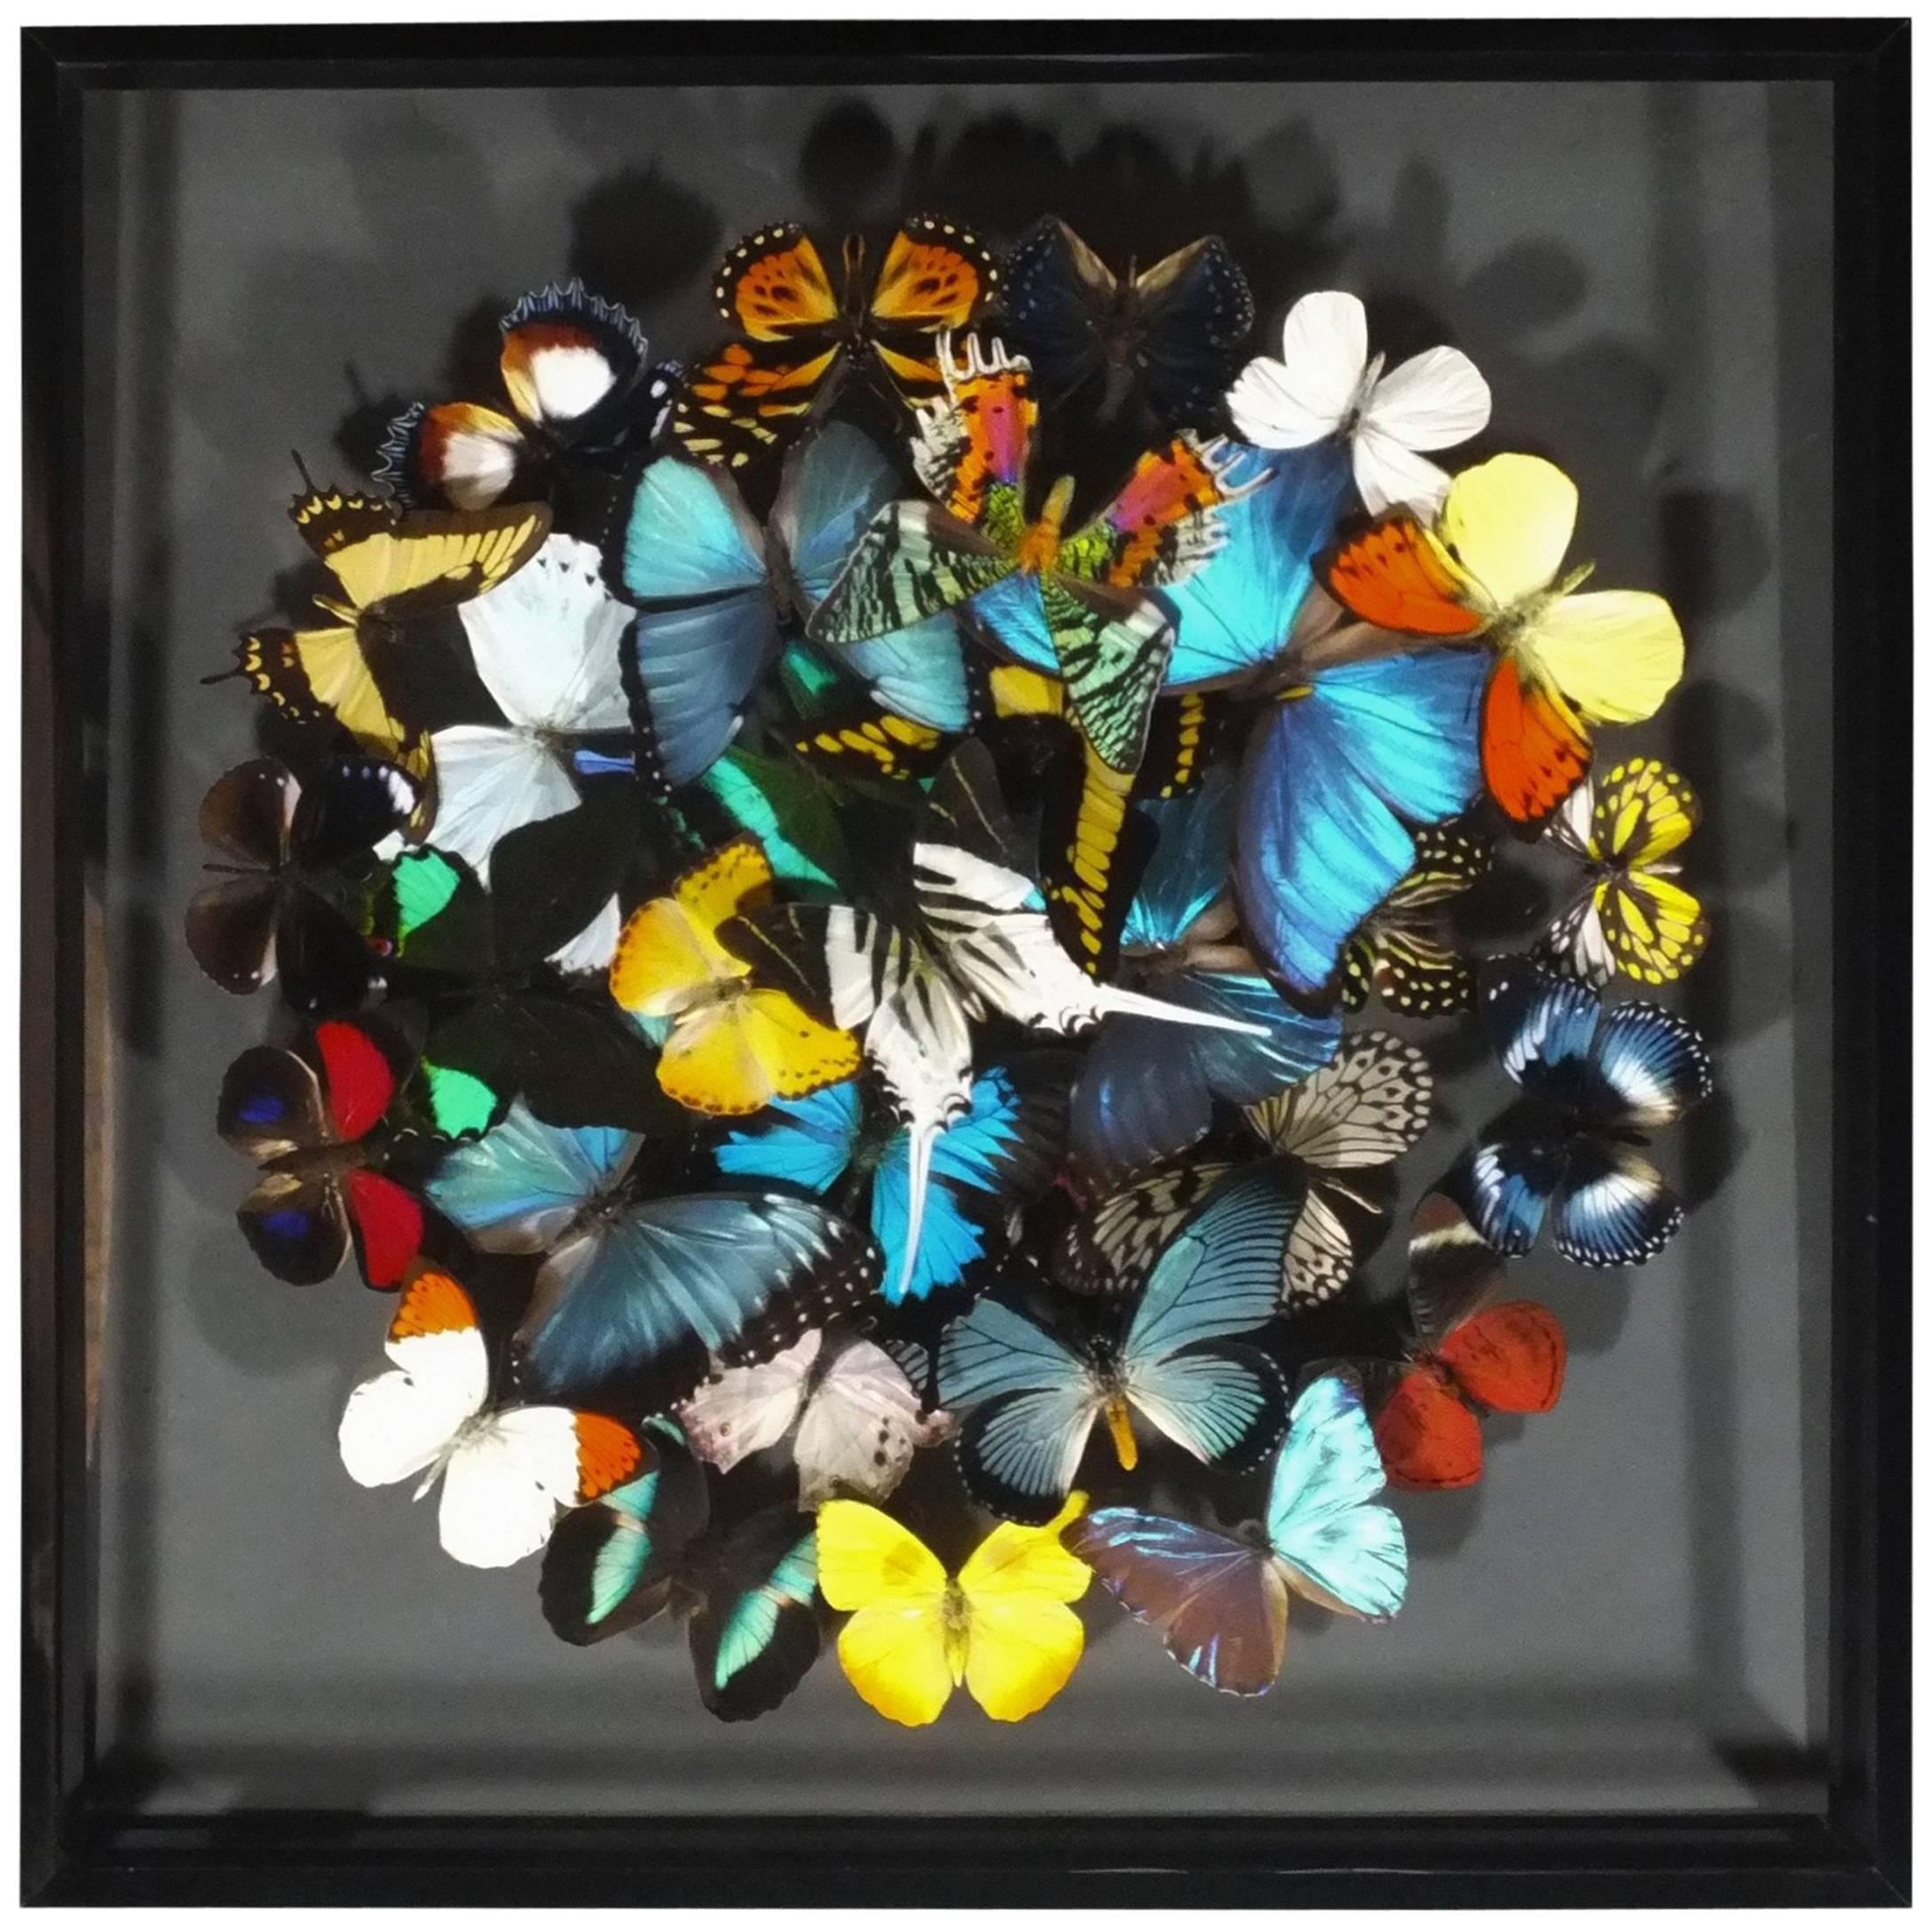 Stunning Colorful Composition of Framed Butterflies by Olivier Viol